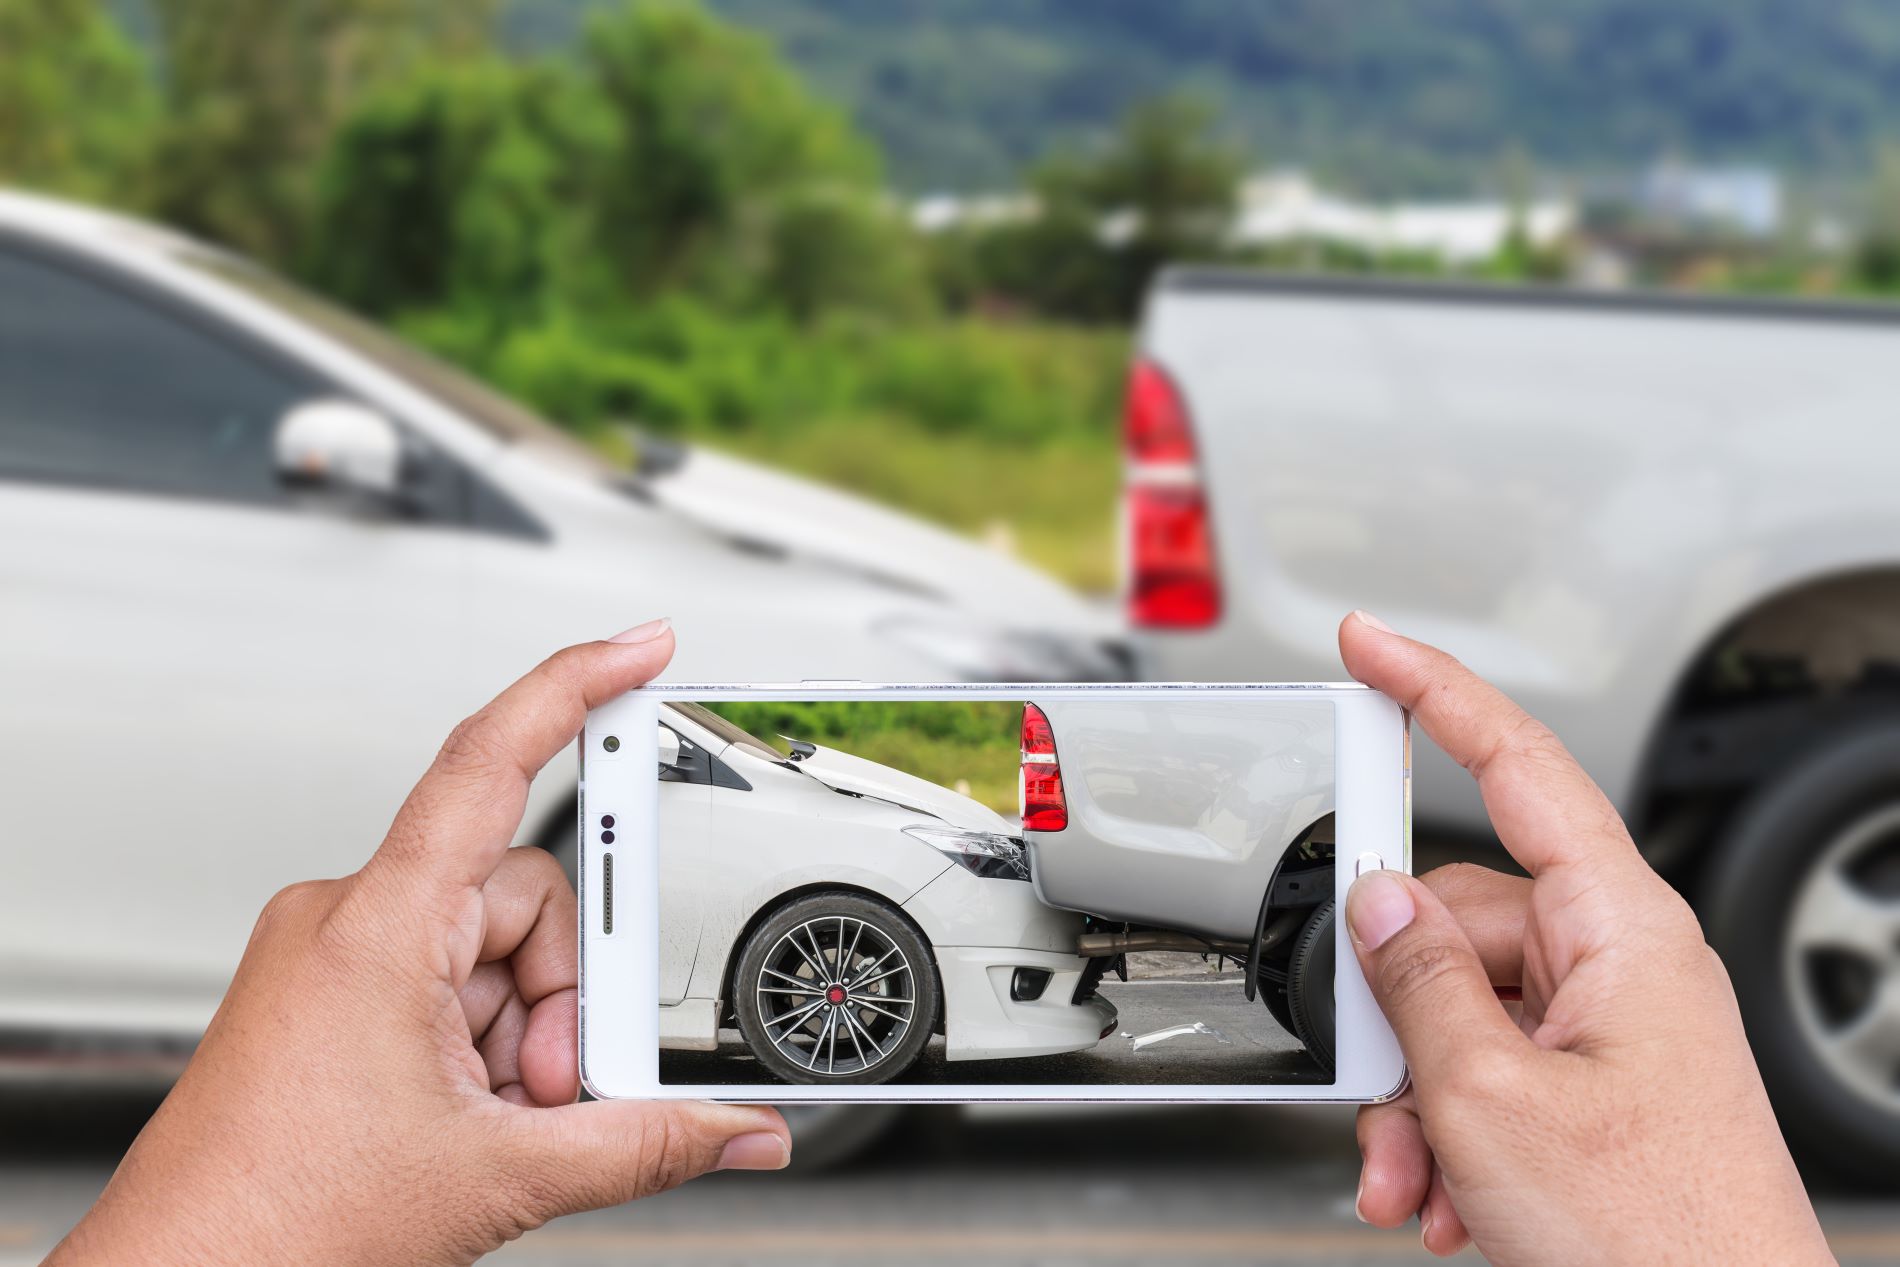 From minor accident situations to serious injuries make sure to get the other driver's insurance company when filing your insurance claim to get the repair costs covered.